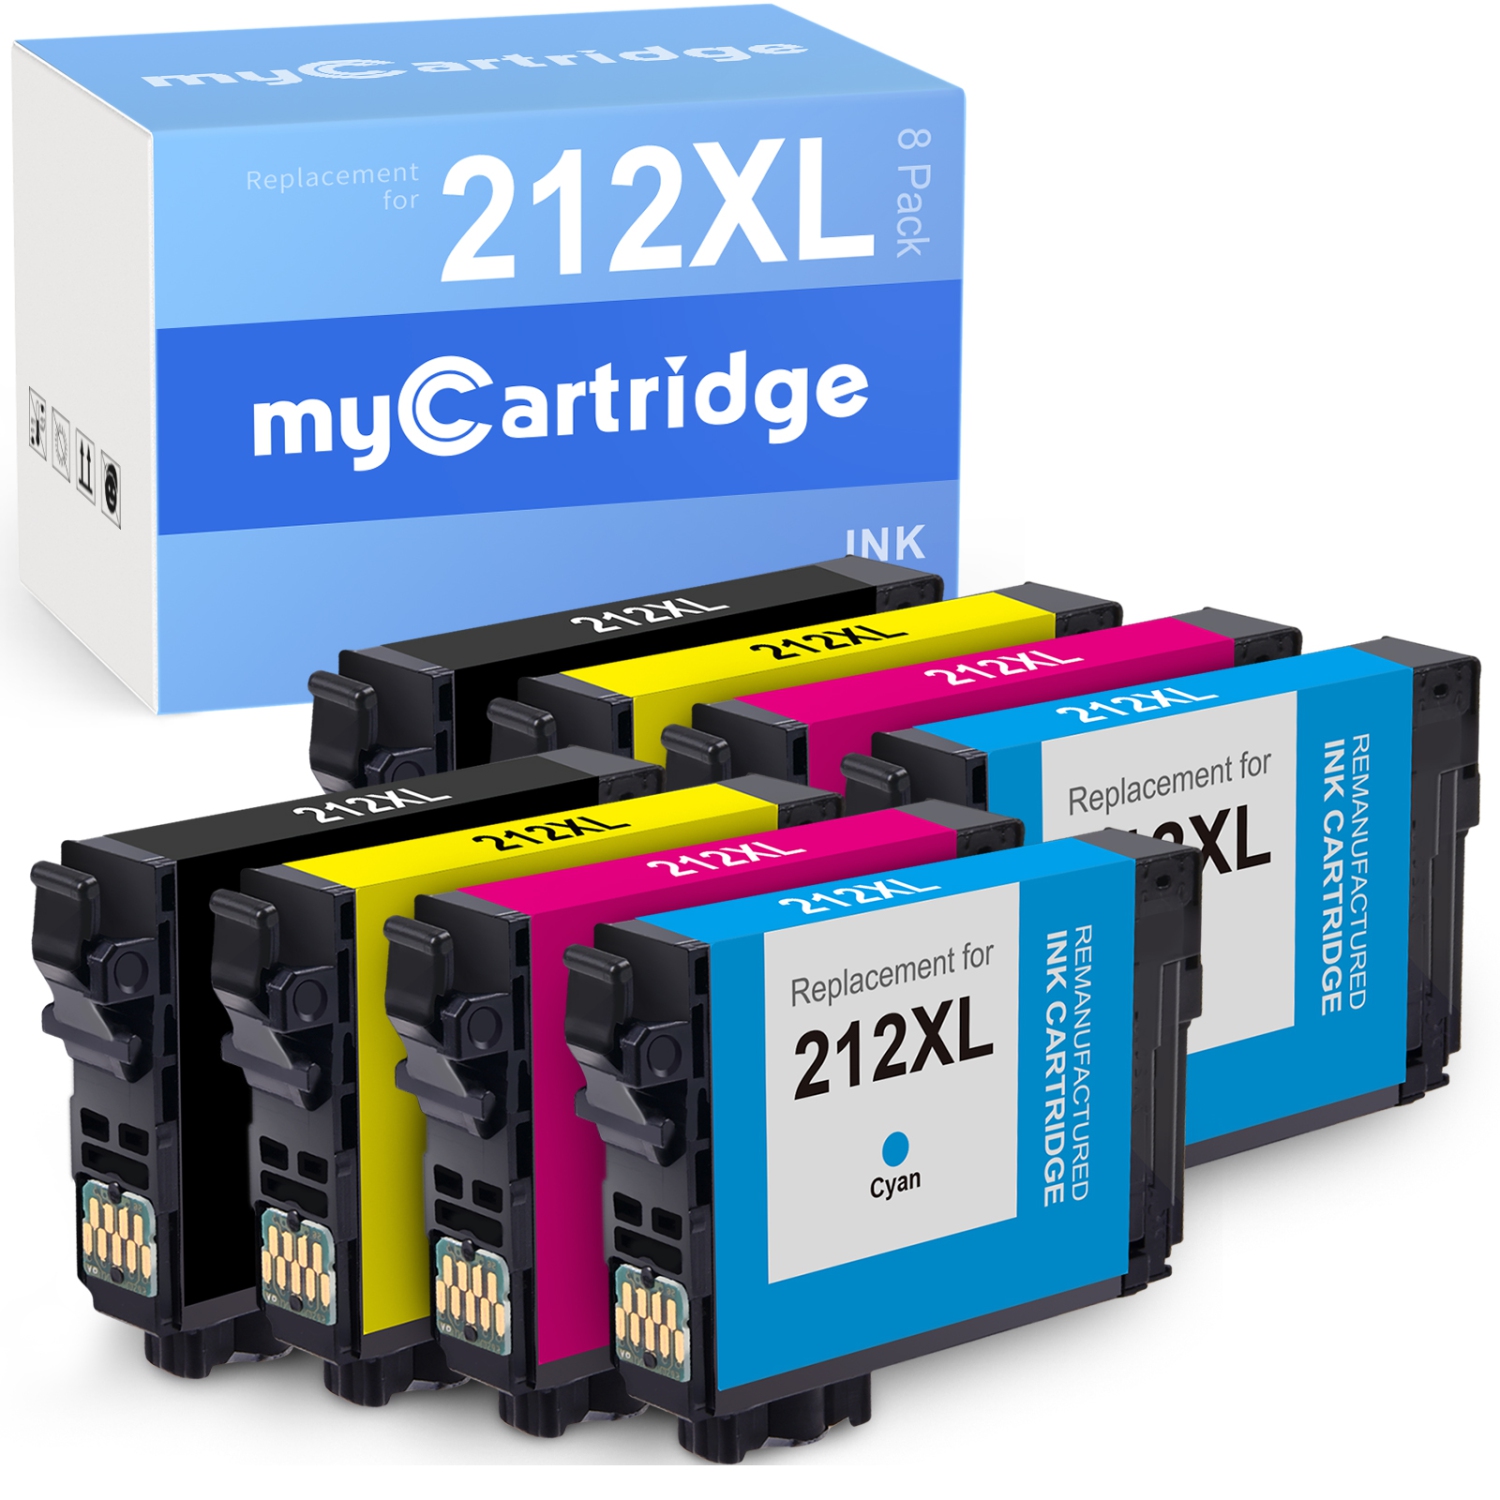 Epson 212XL Ink Cartridges | MYCARTRIDGE Remanufactured 212 XL 8-Pack High-Yield and Standard Capacity